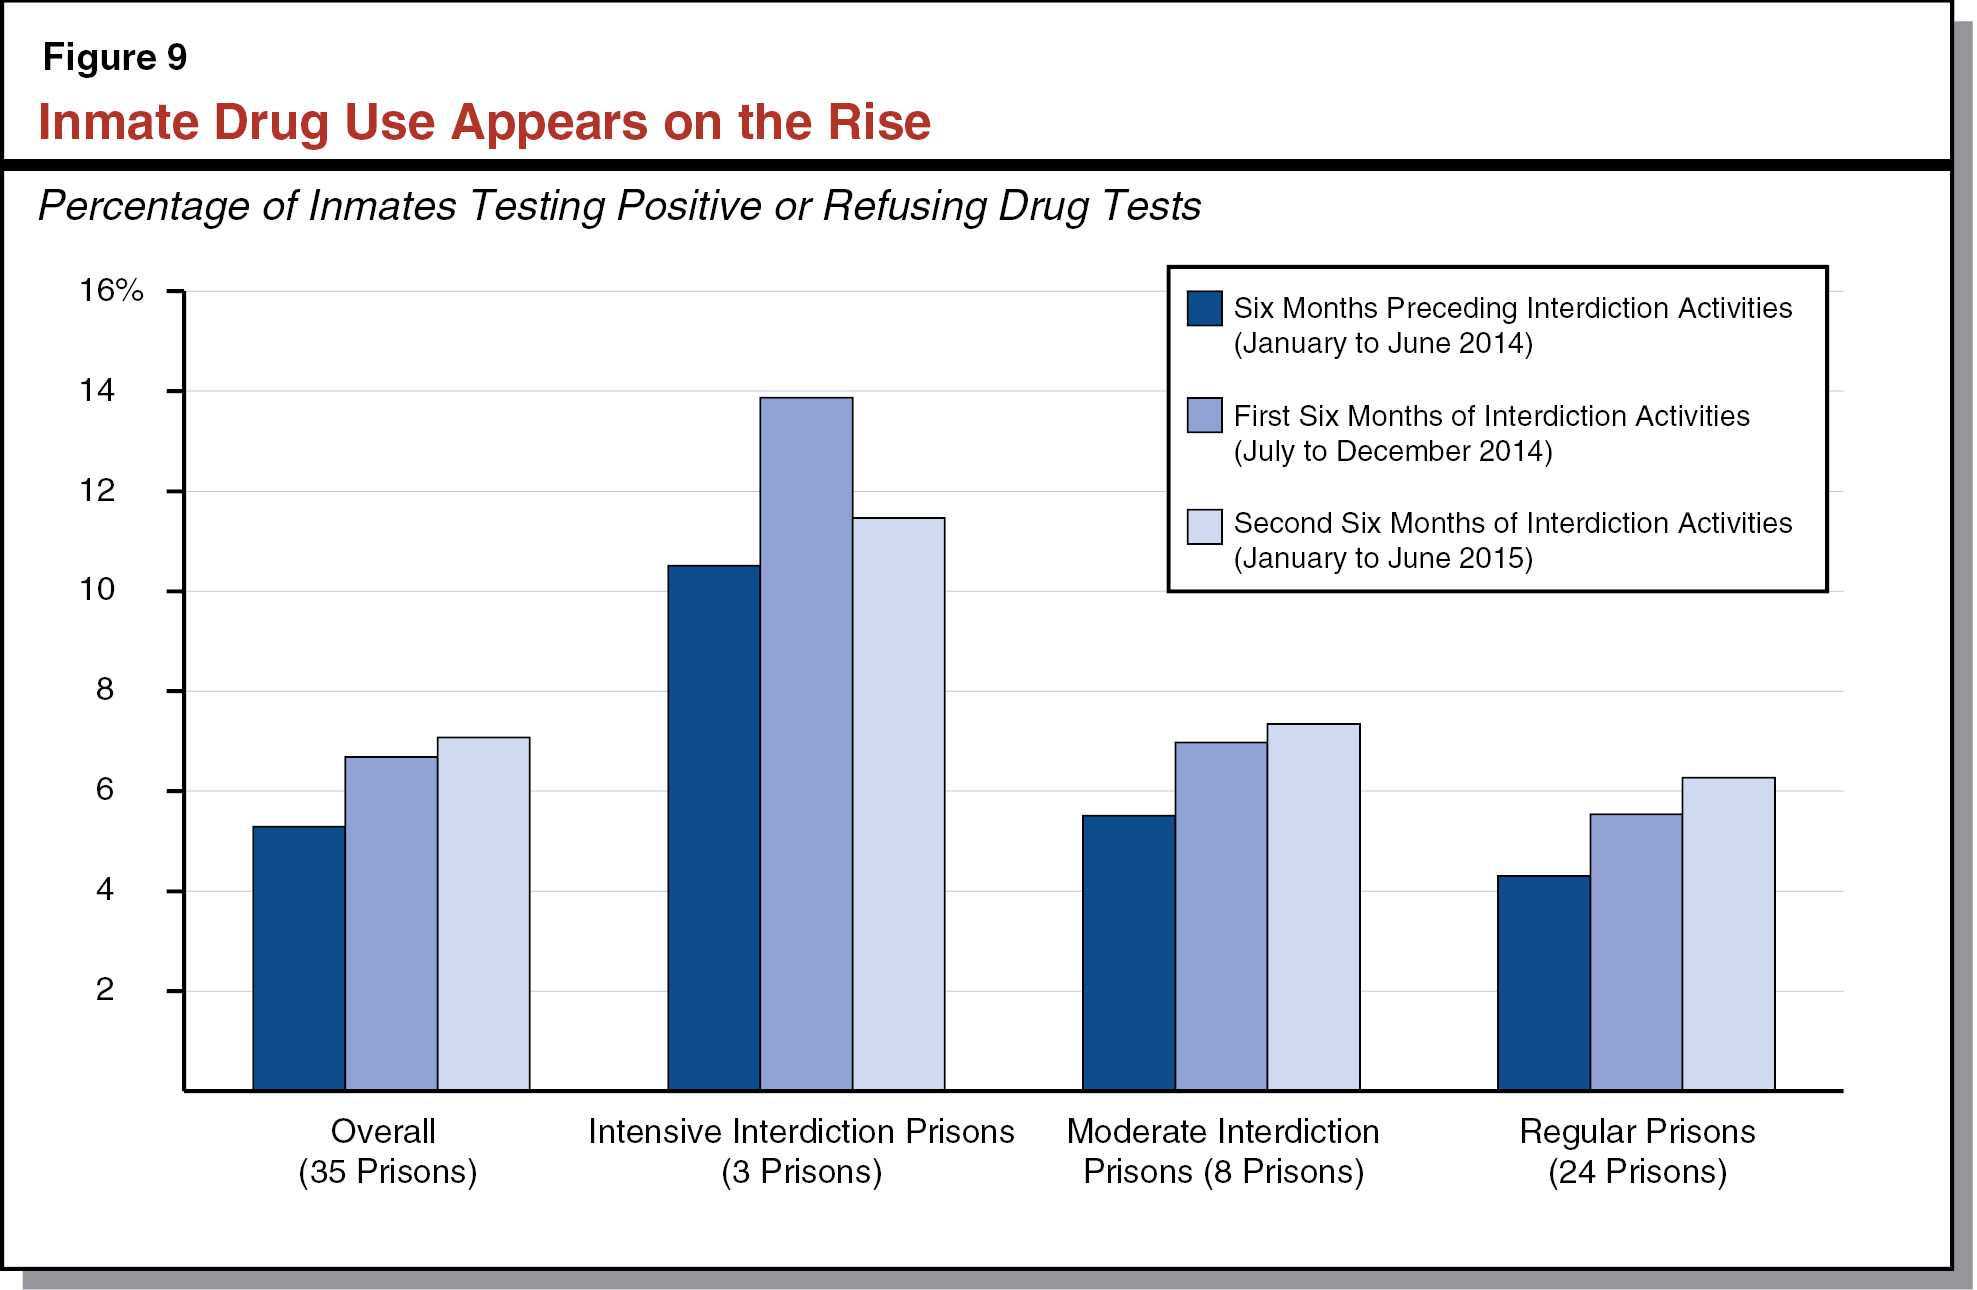 Figure 9 - Inmate Drug Use Appears on the Rise